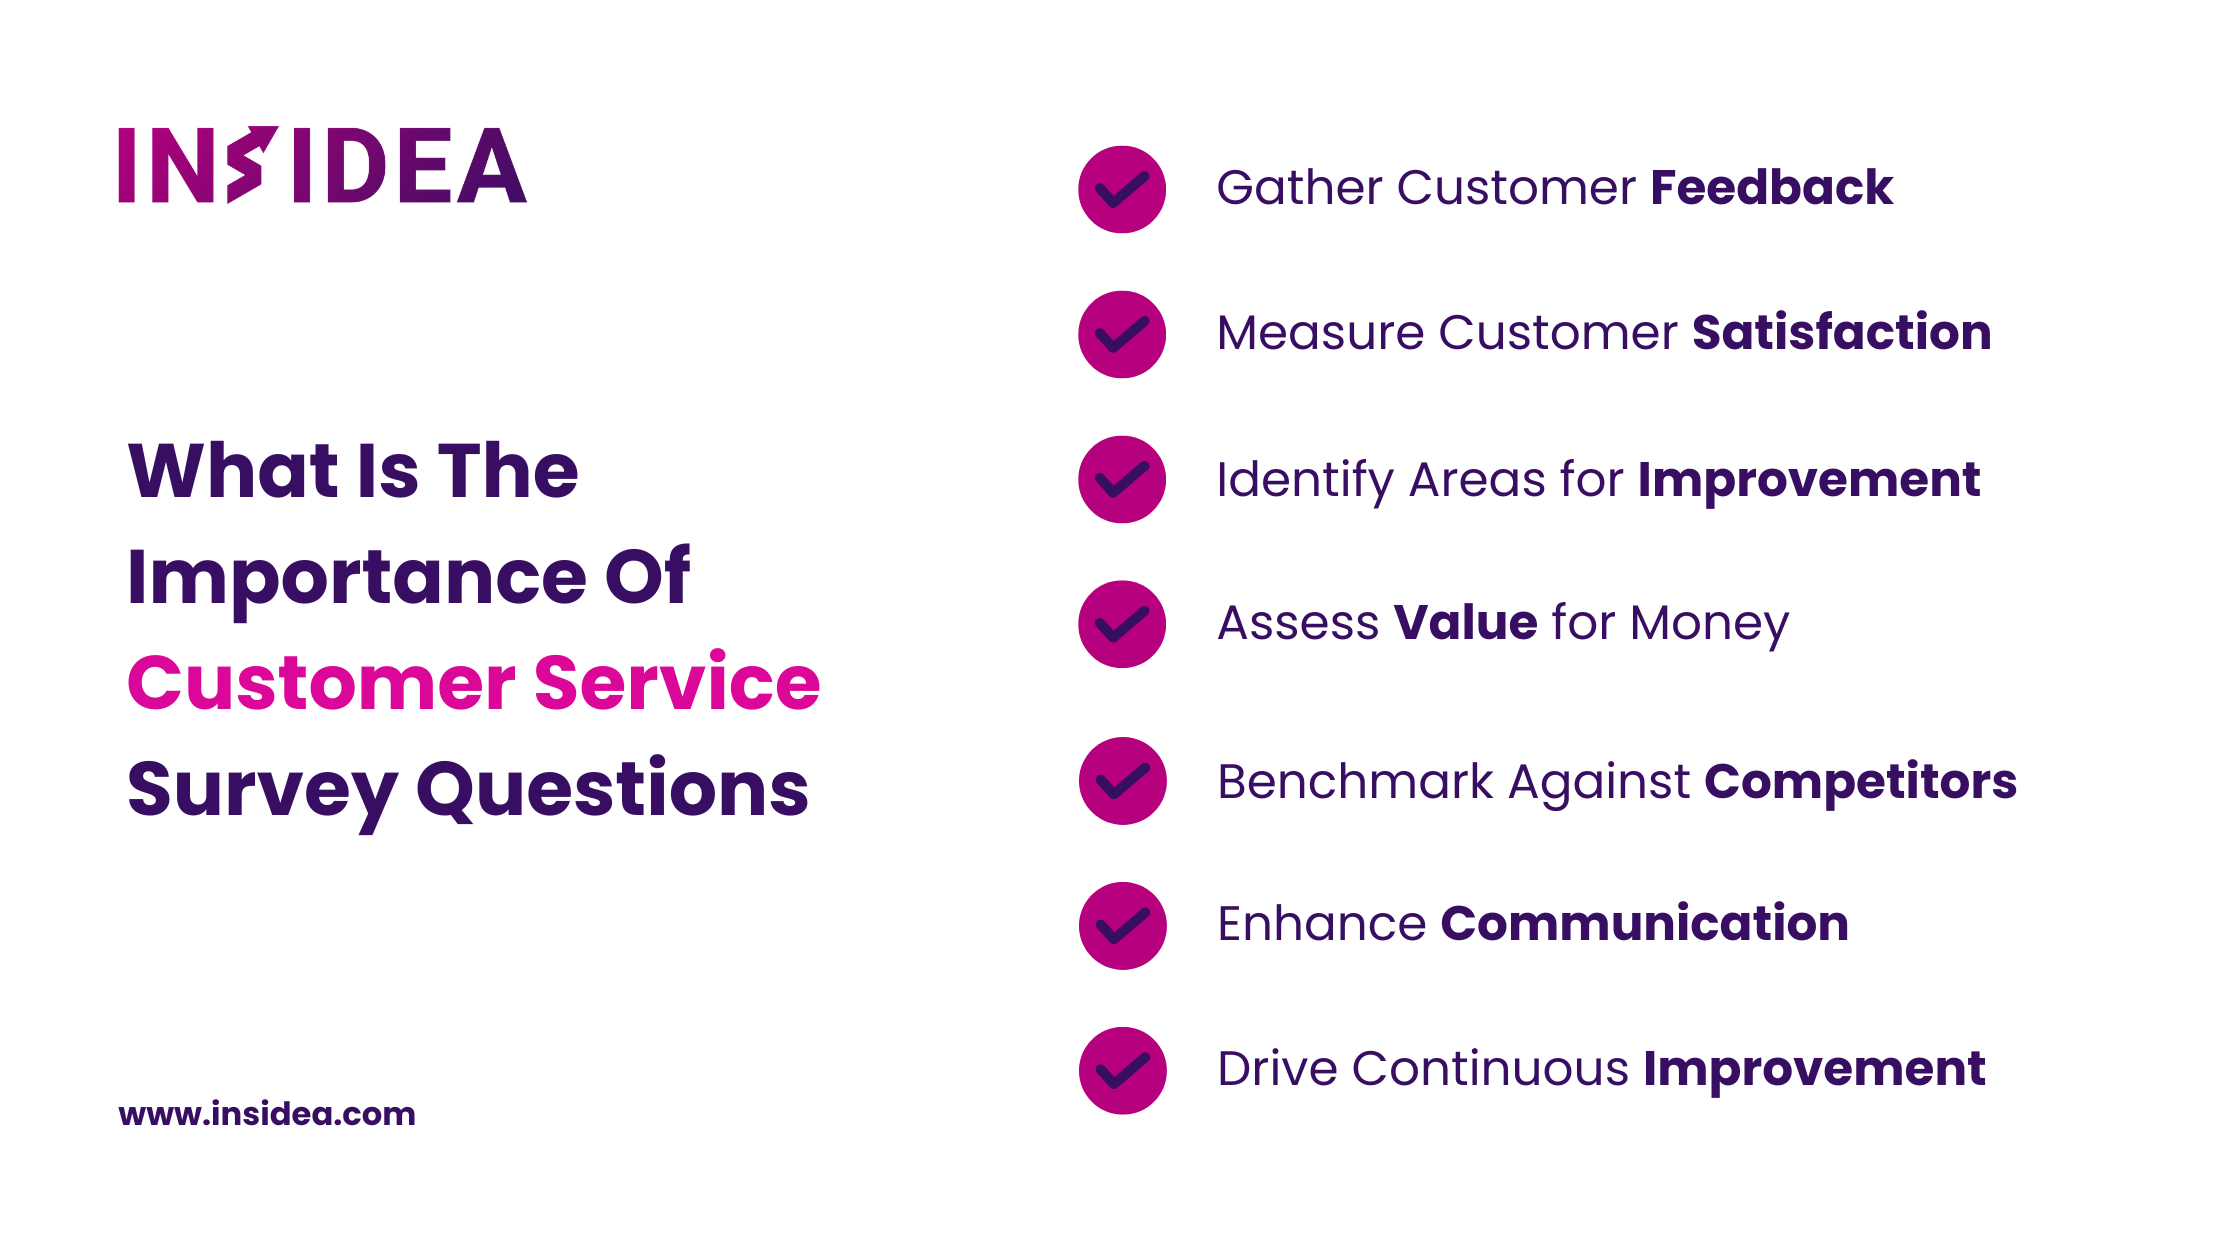 What Is The Importance Of Customer Service Survey Questions